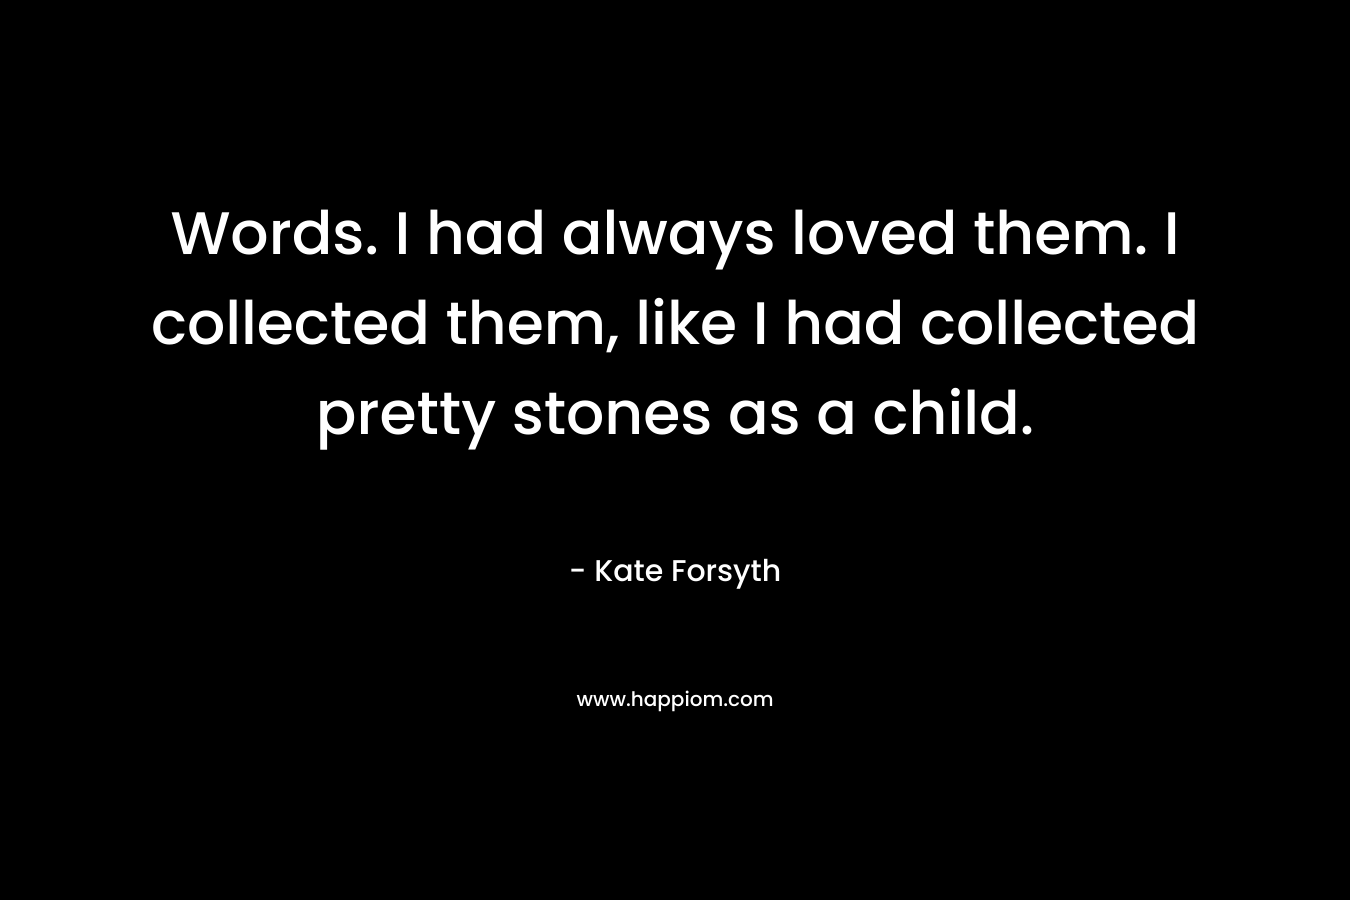 Words. I had always loved them. I collected them, like I had collected pretty stones as a child. – Kate Forsyth